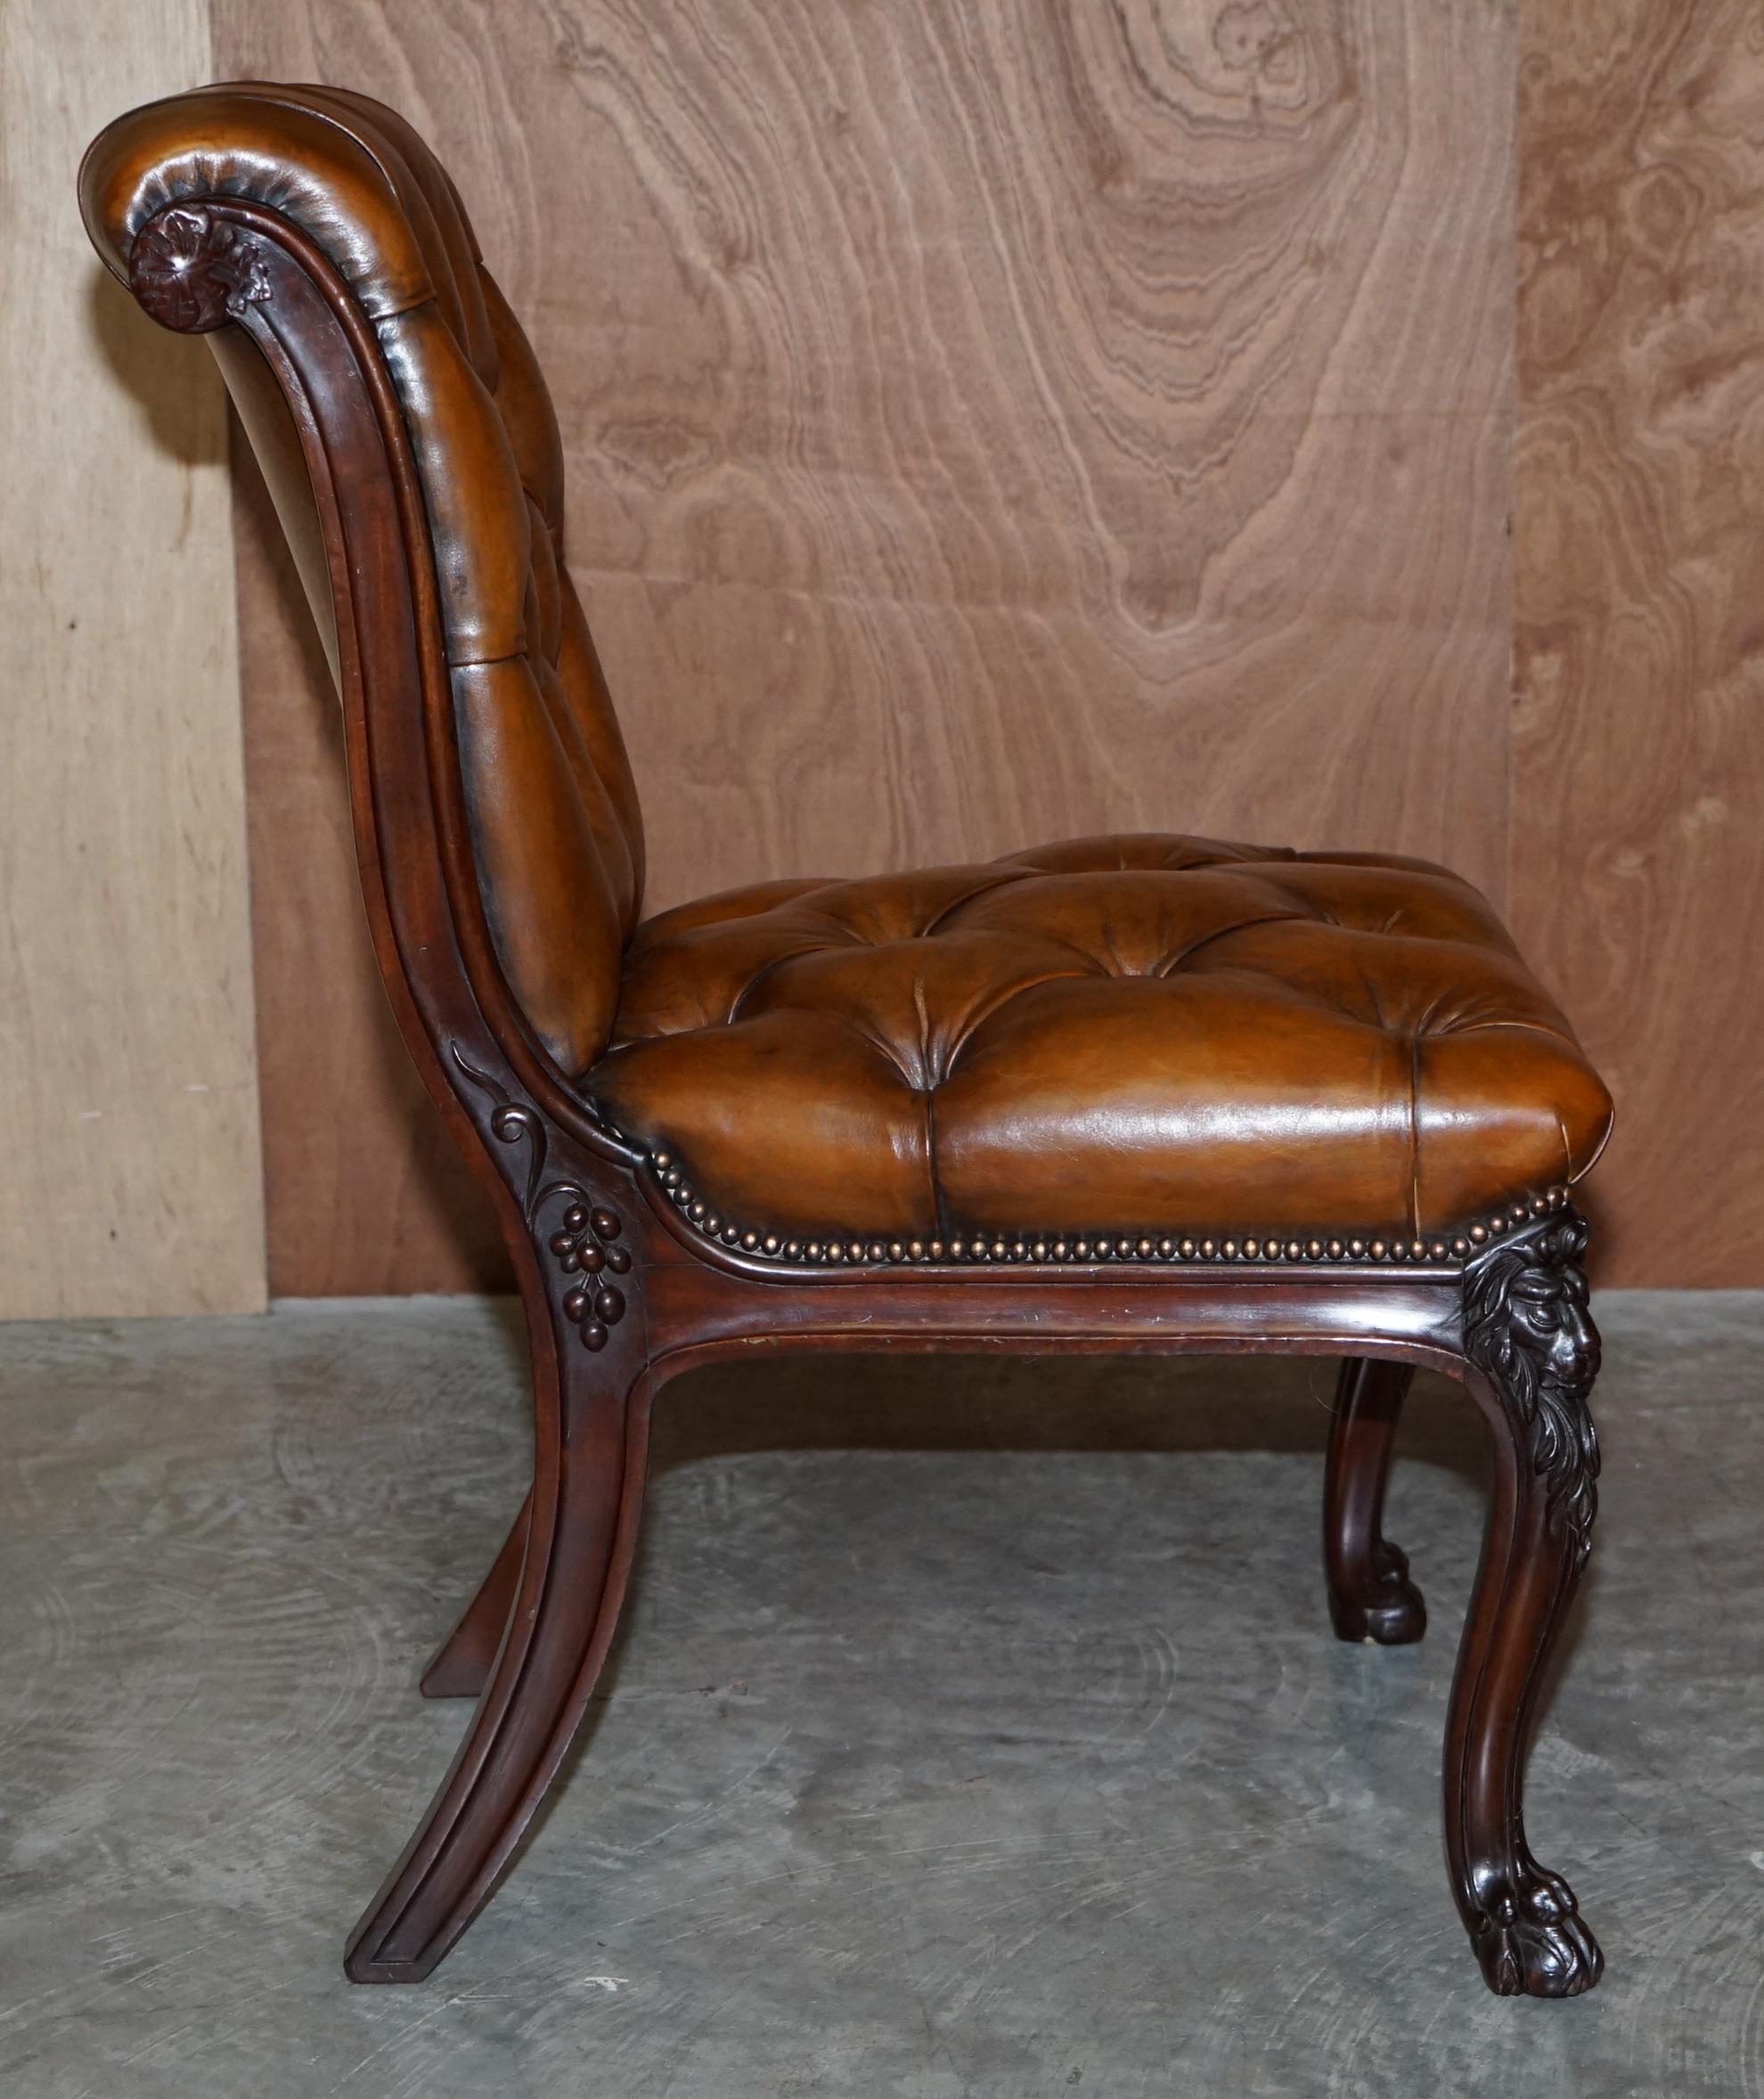 circa 1845 C Hindley & Sons Lion Carved Chesterfield Brown Leather Dining Chairs For Sale 11